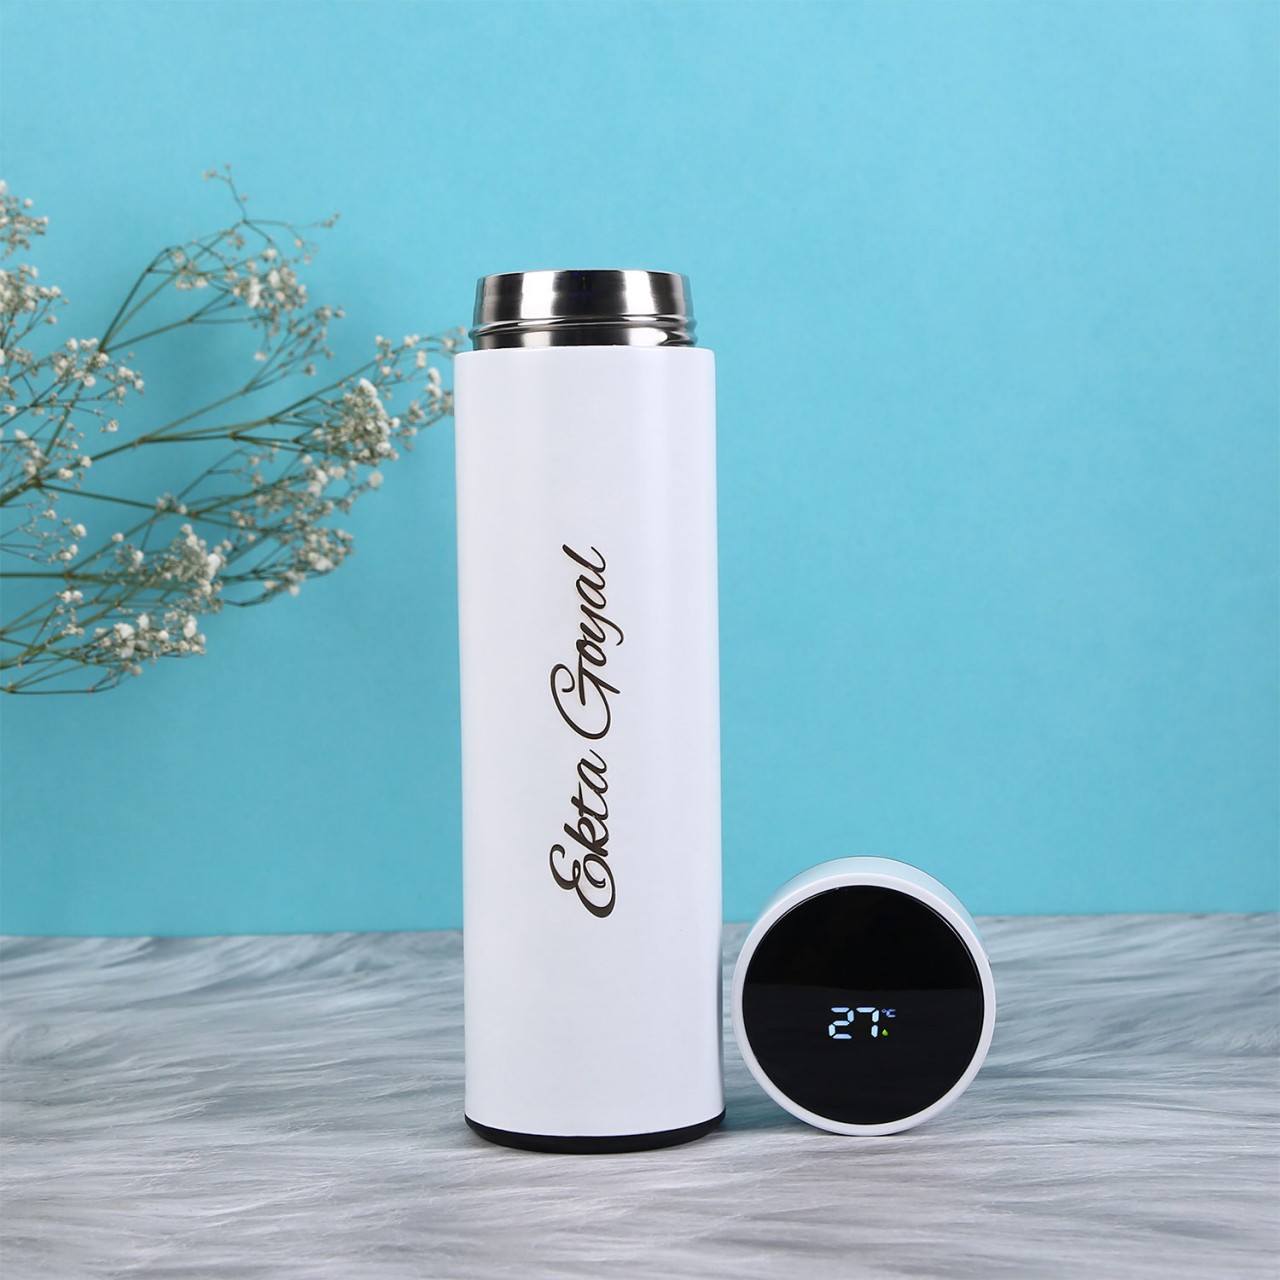 Personalized Temperature Bottle With Smart Display - White